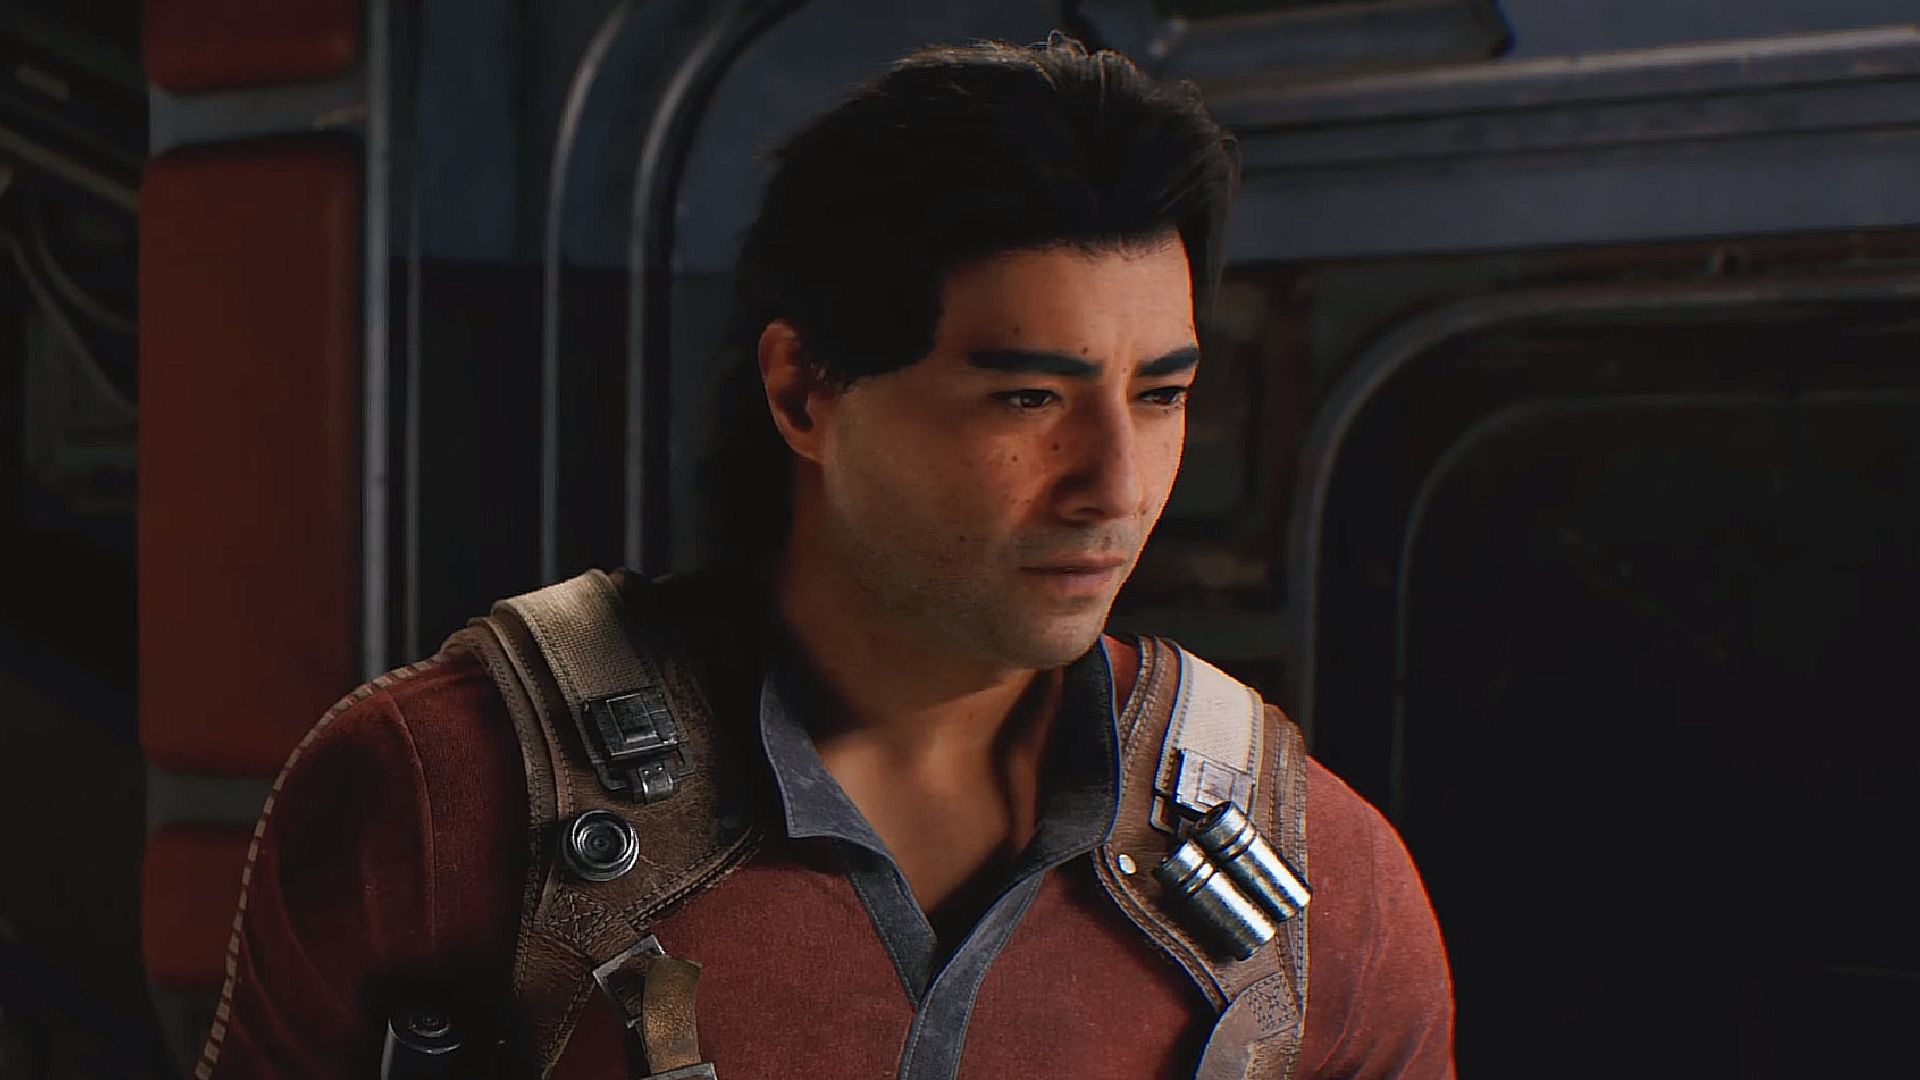 Star Wars Jedi Survivor Characters: Bode can be seen